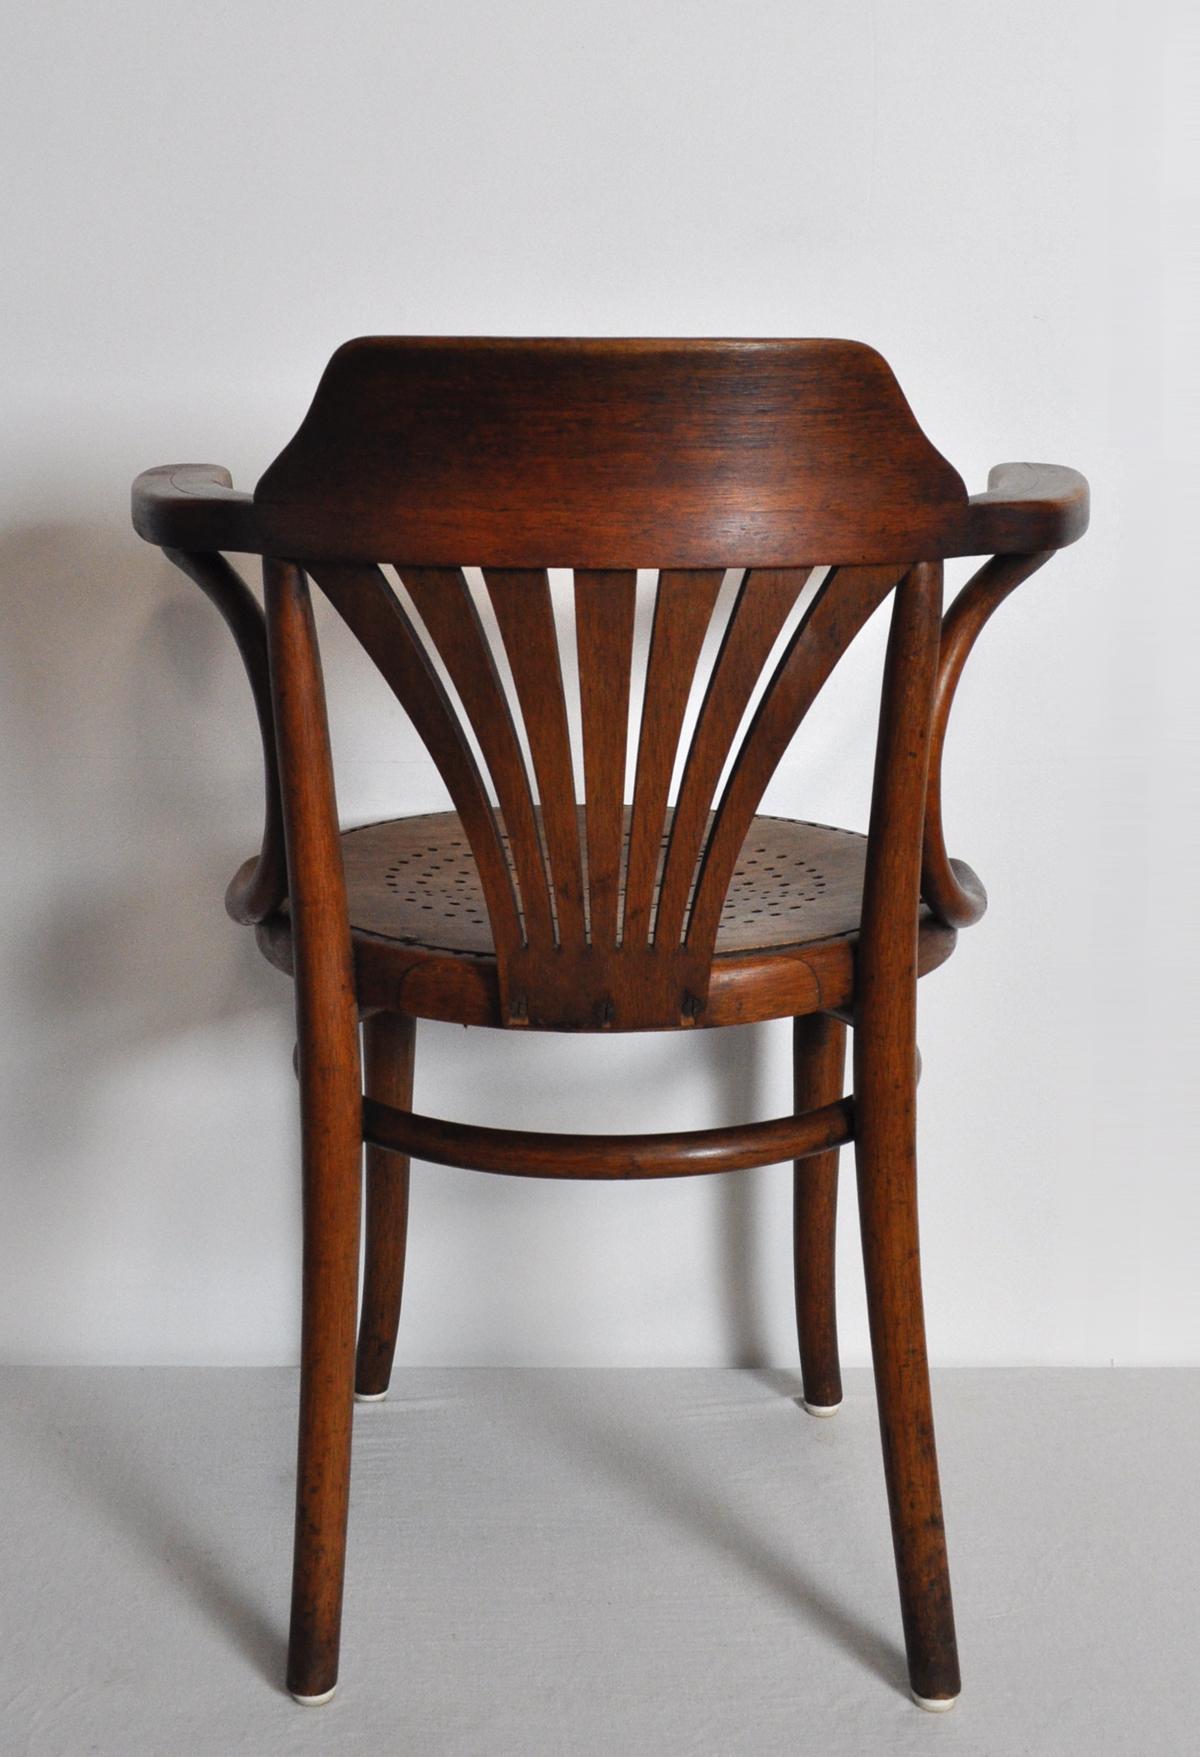 19th Century Rare Early Model Nr. 233 Bentwood Armchair Manufactured by Thonet in Austria